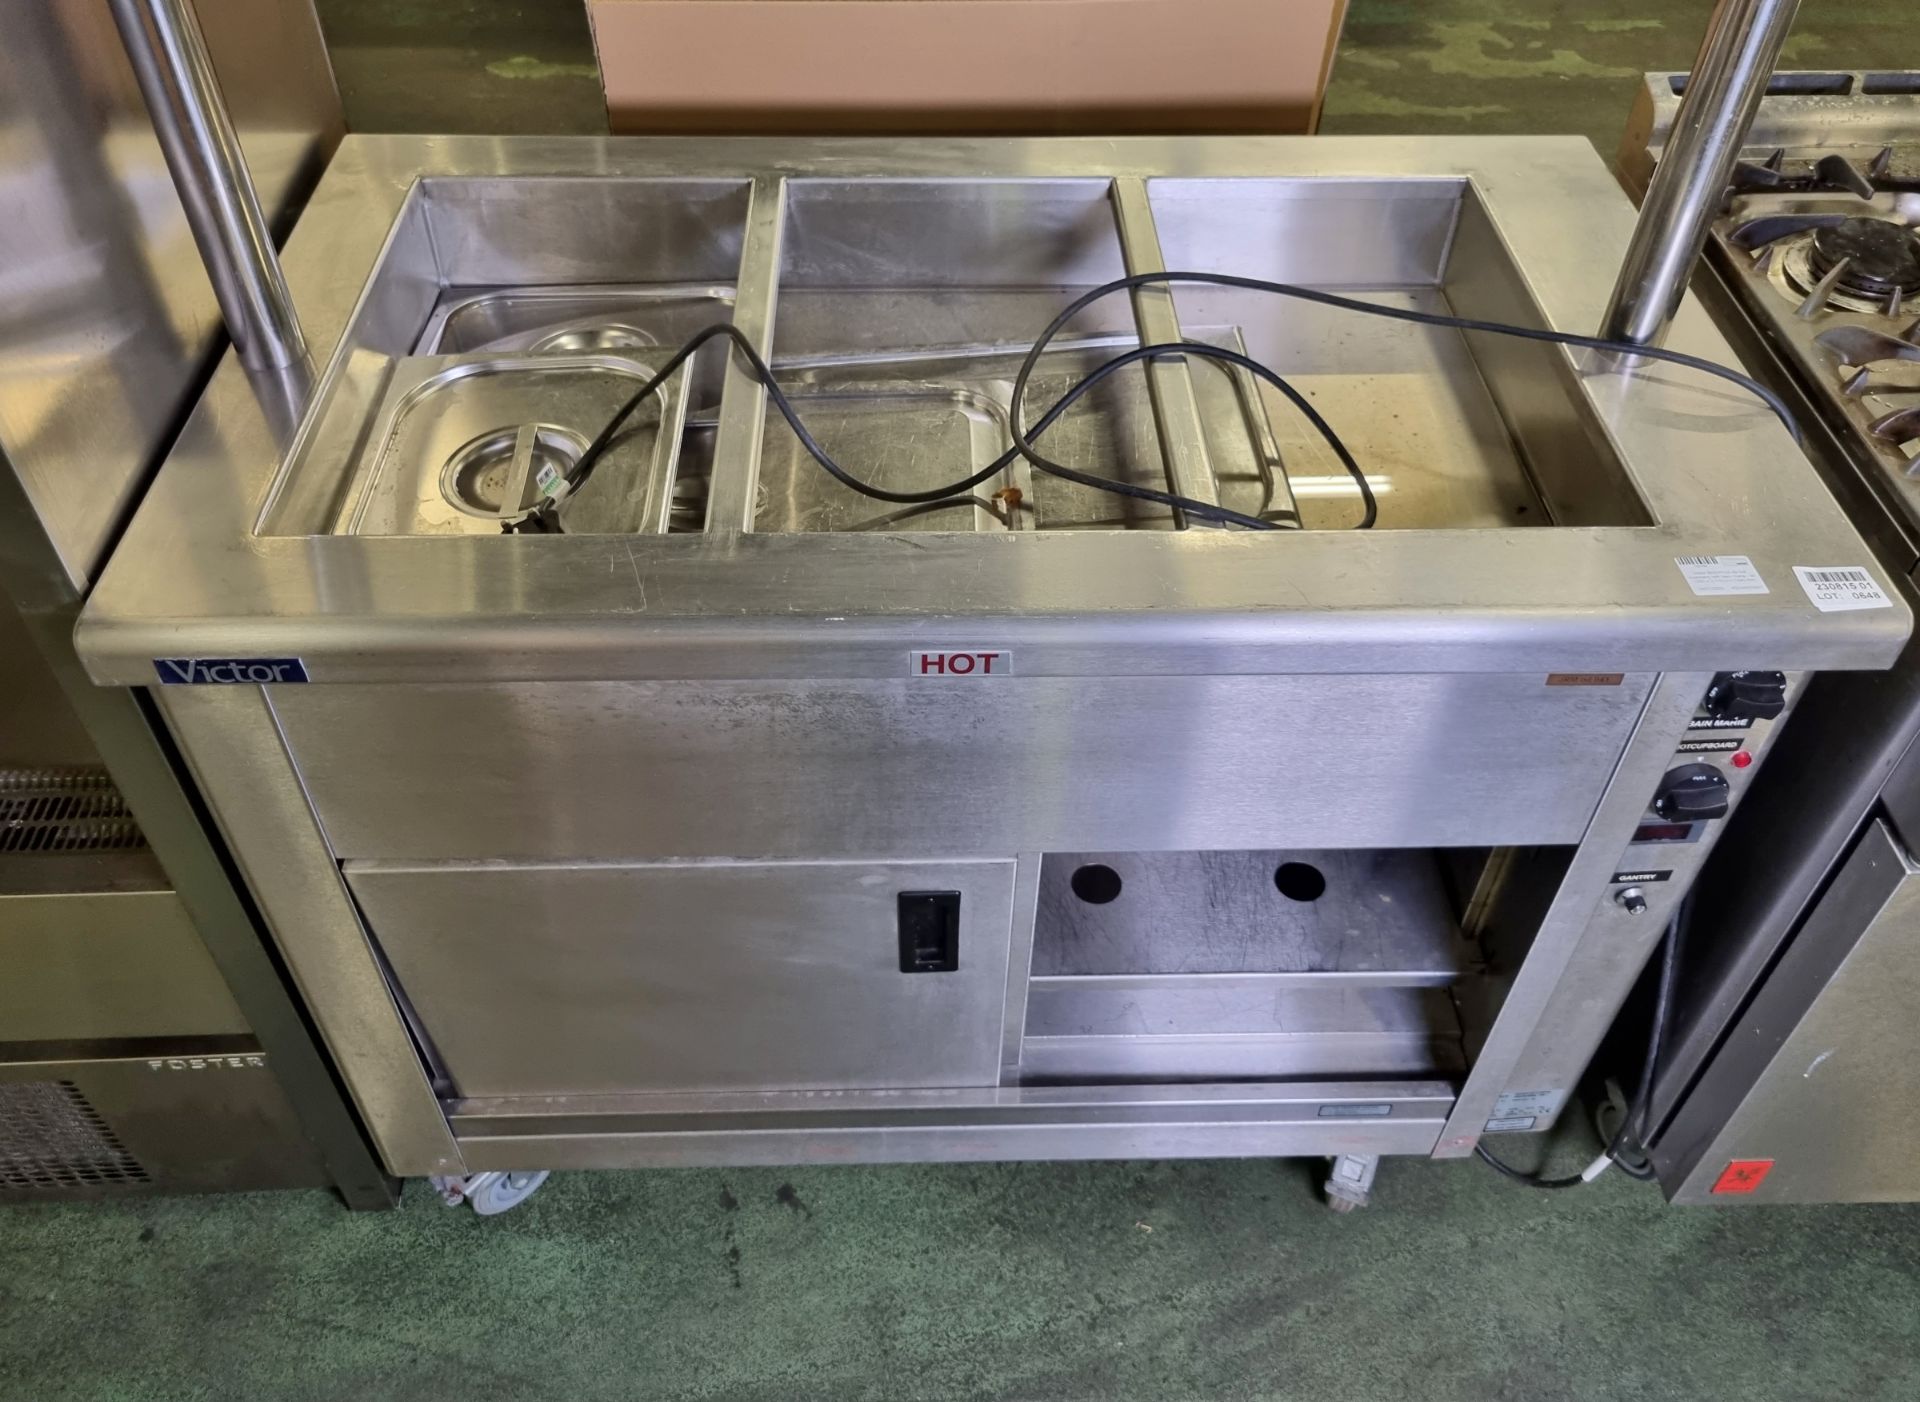 Victor SCEP12Z-42 hot cupboard with bain marie - W 1200 x D 710 x H 1440 mm - Image 3 of 6